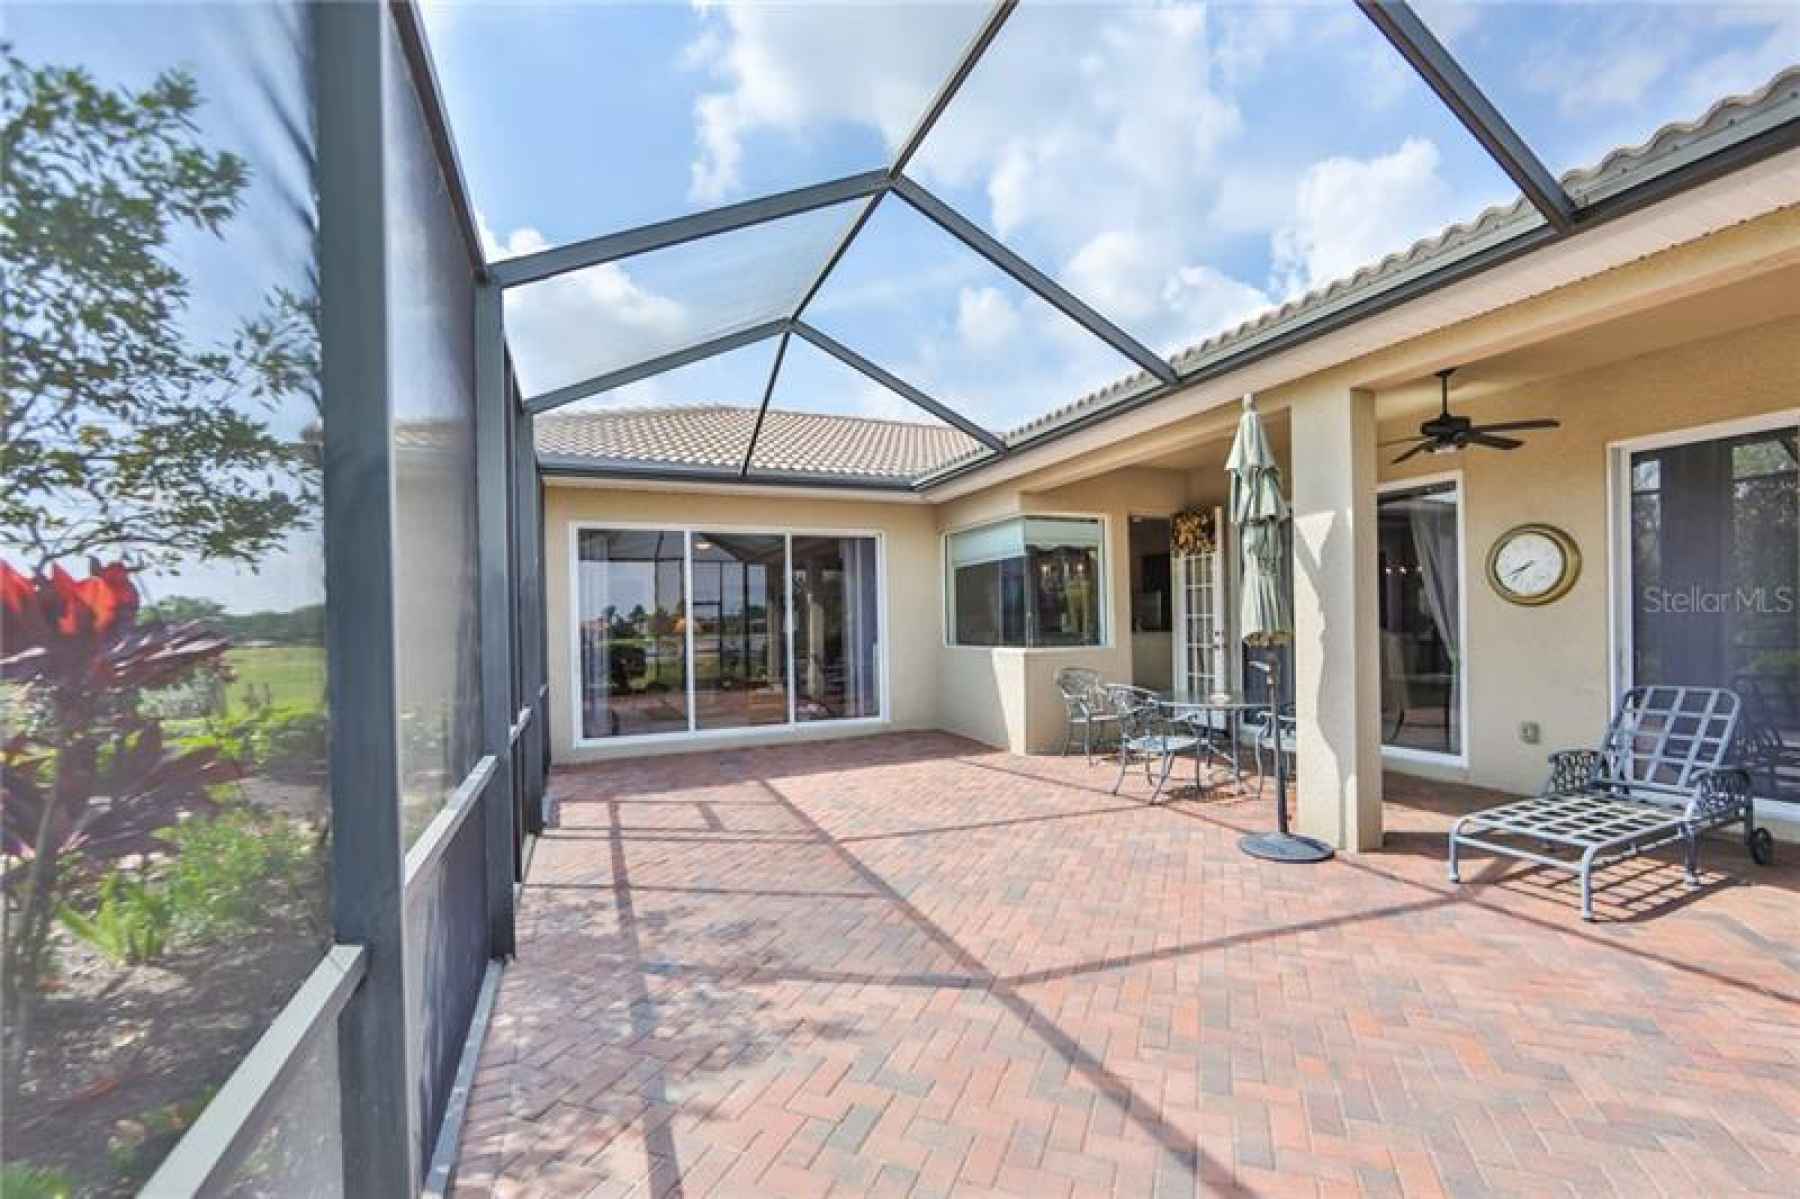 Lot of space to enjoy Florida living.